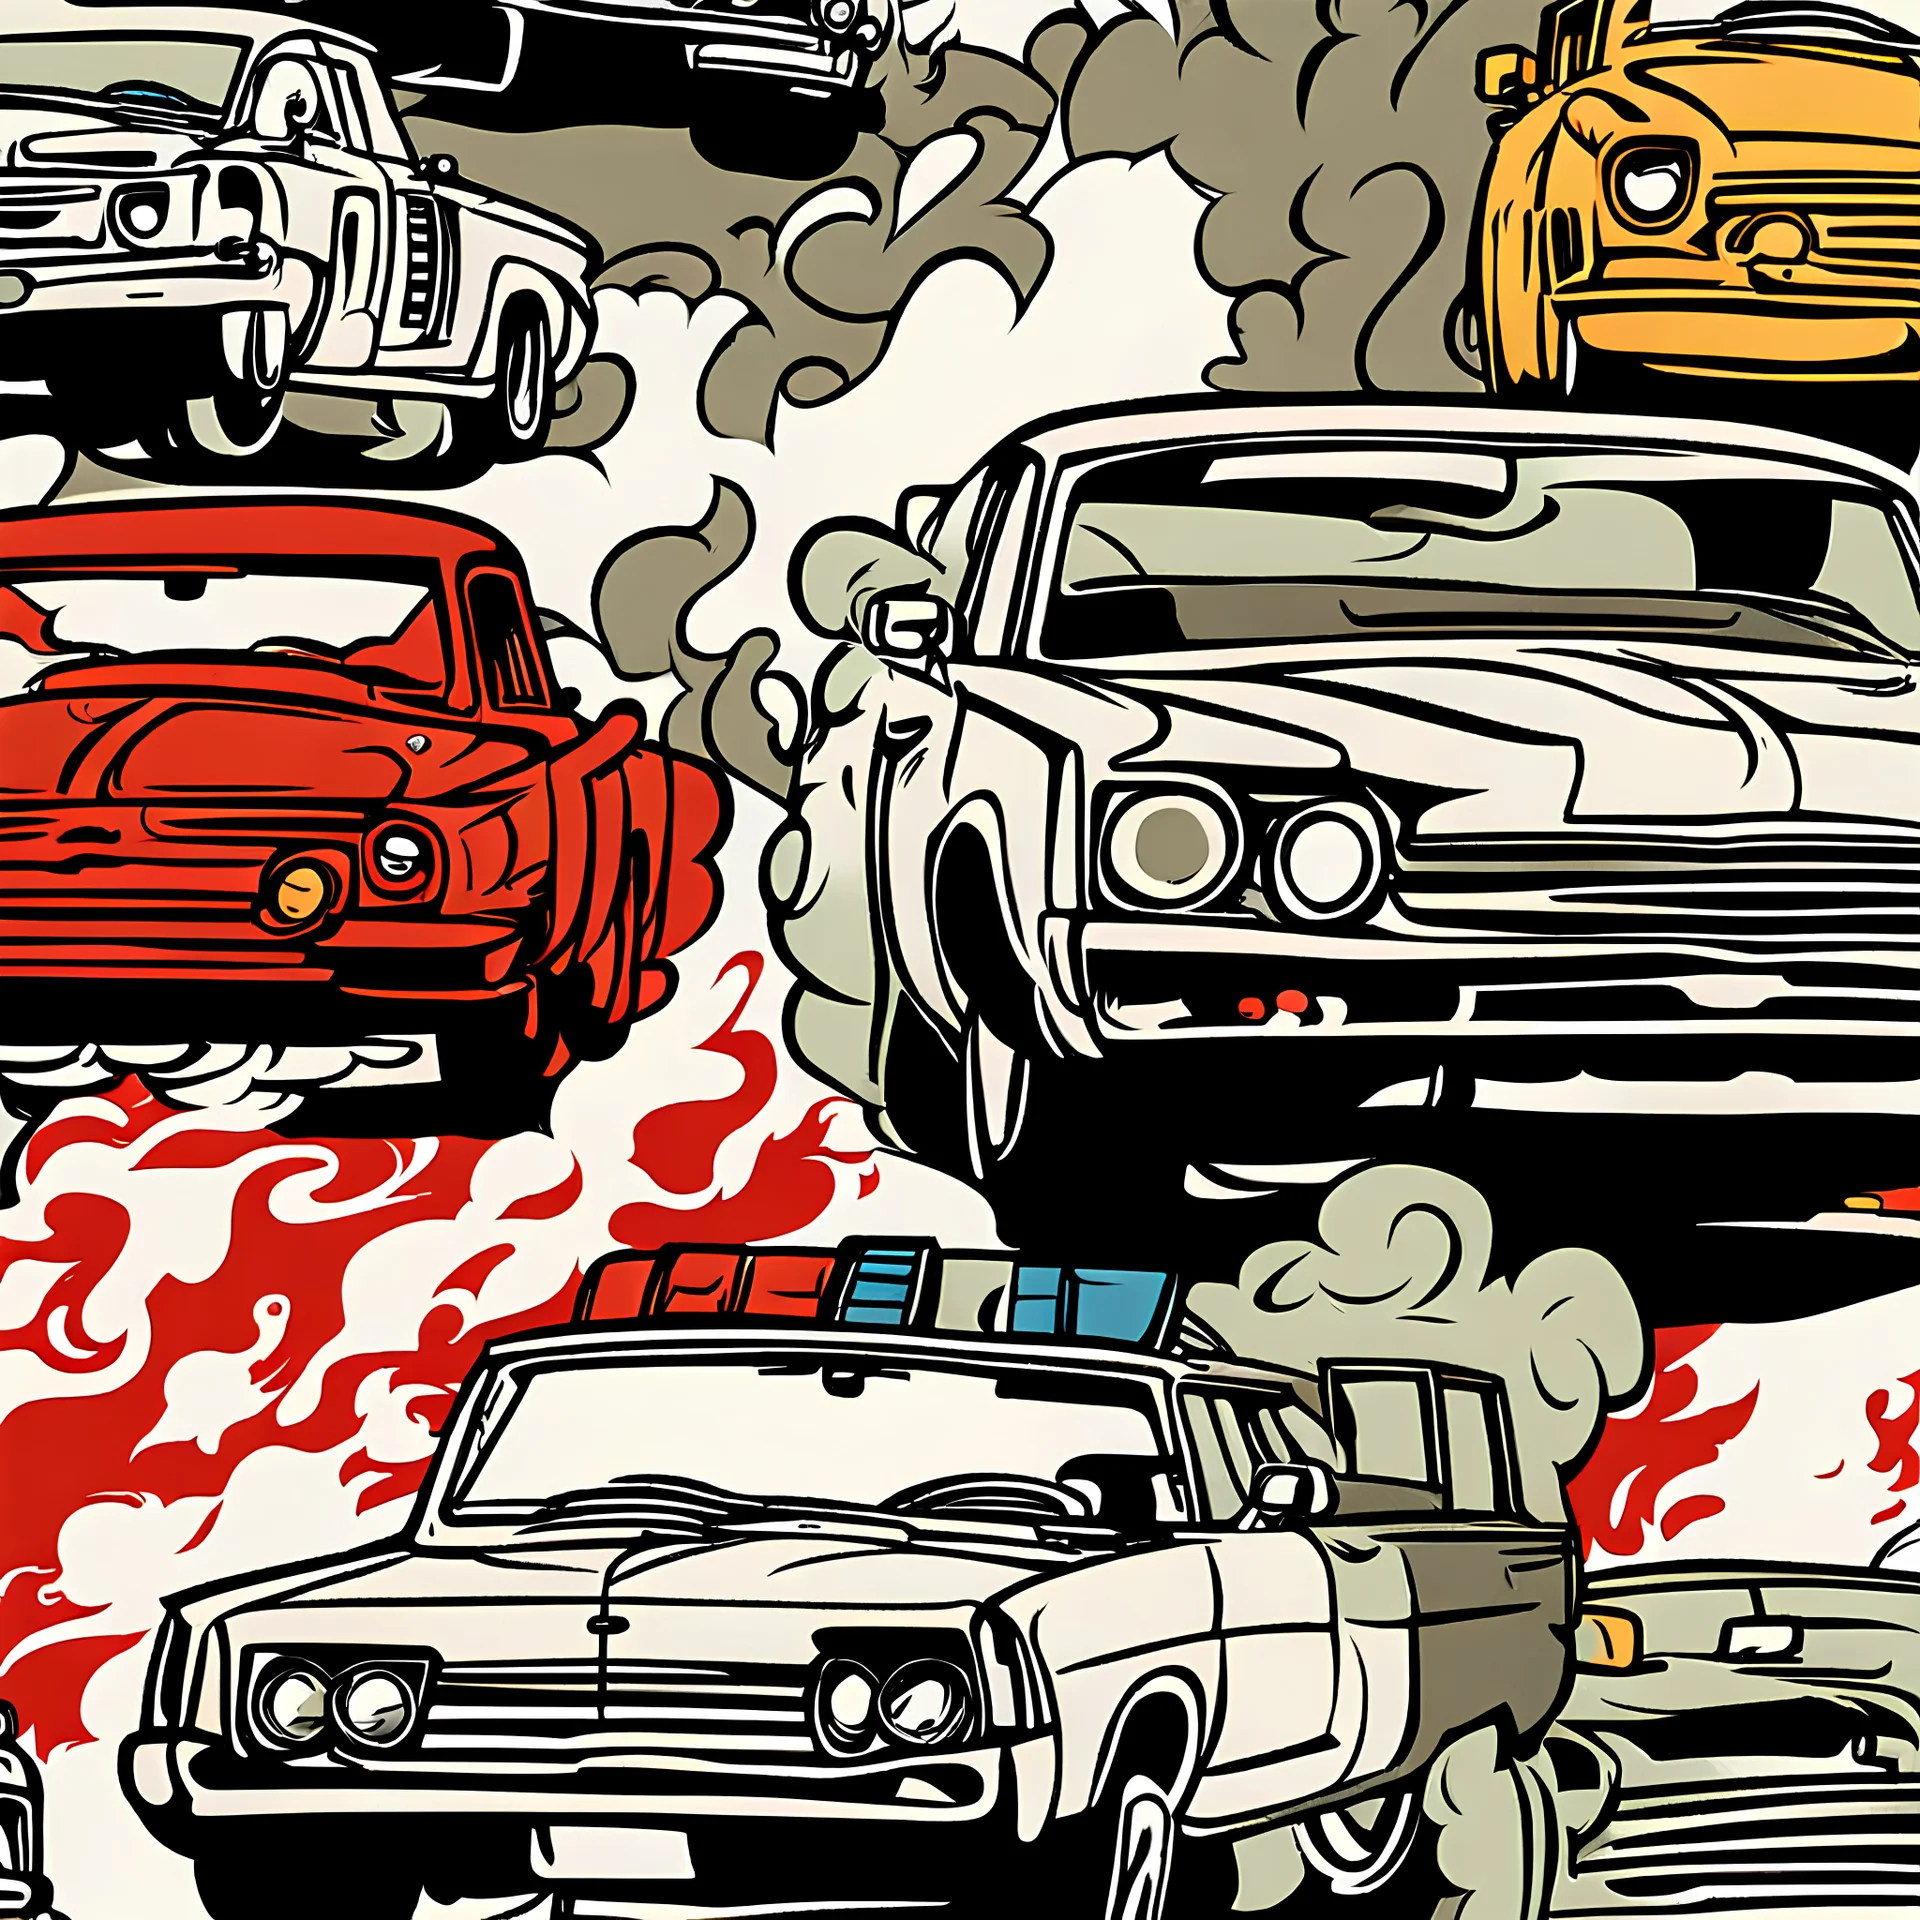 a comic books style illustration of smoke exits from cars